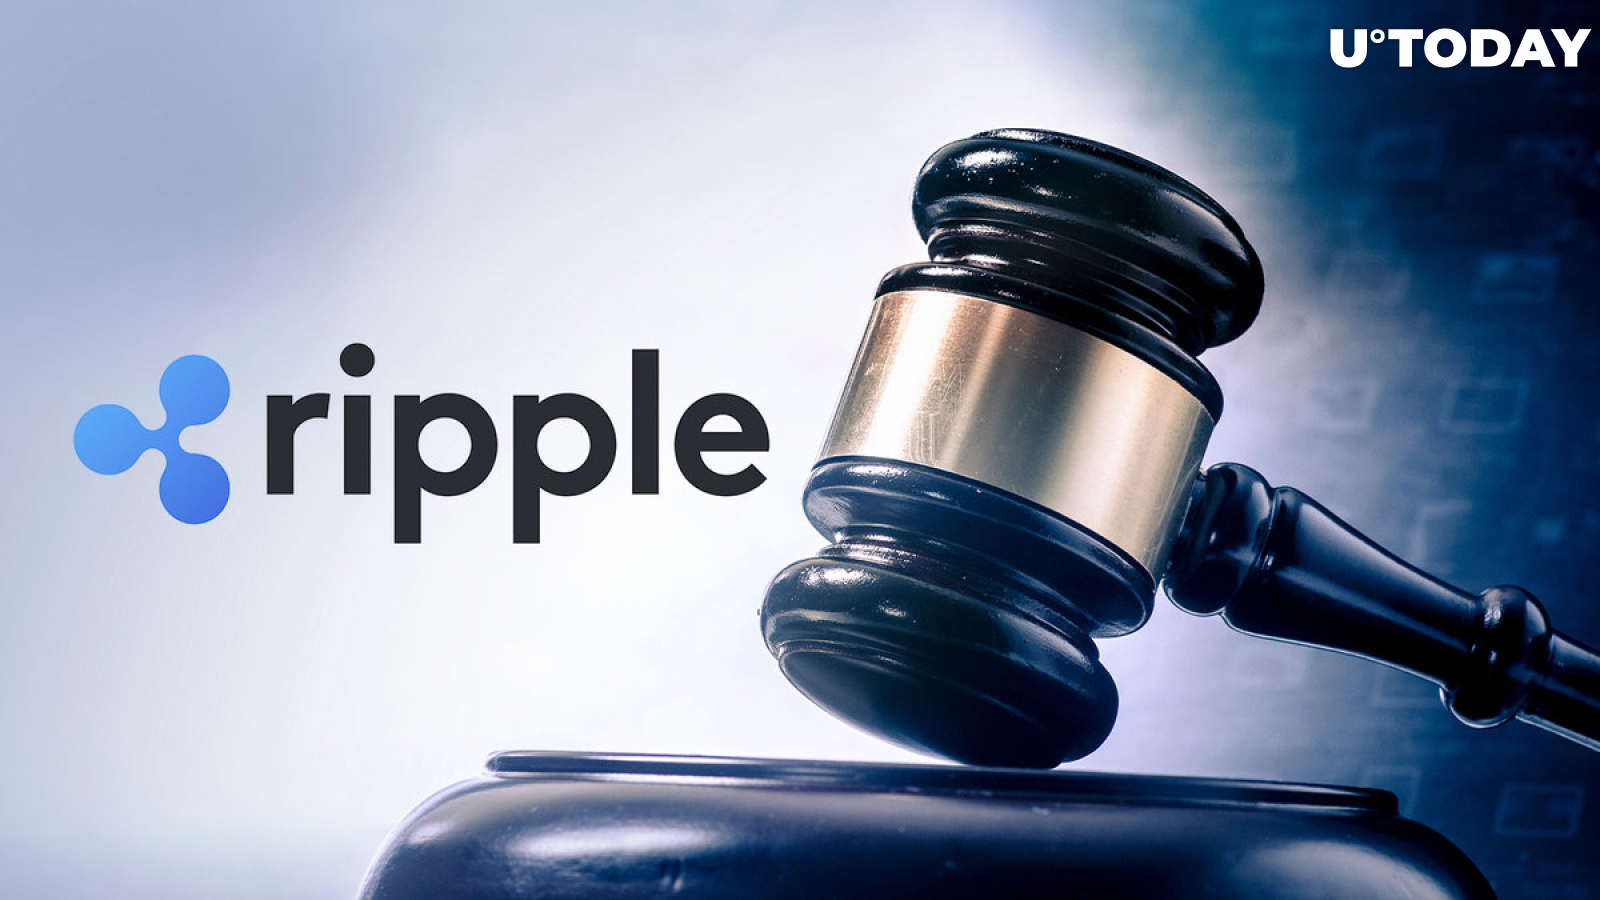 Ripple Lawsuit: Important Court Dates Coming, Here's What to Know